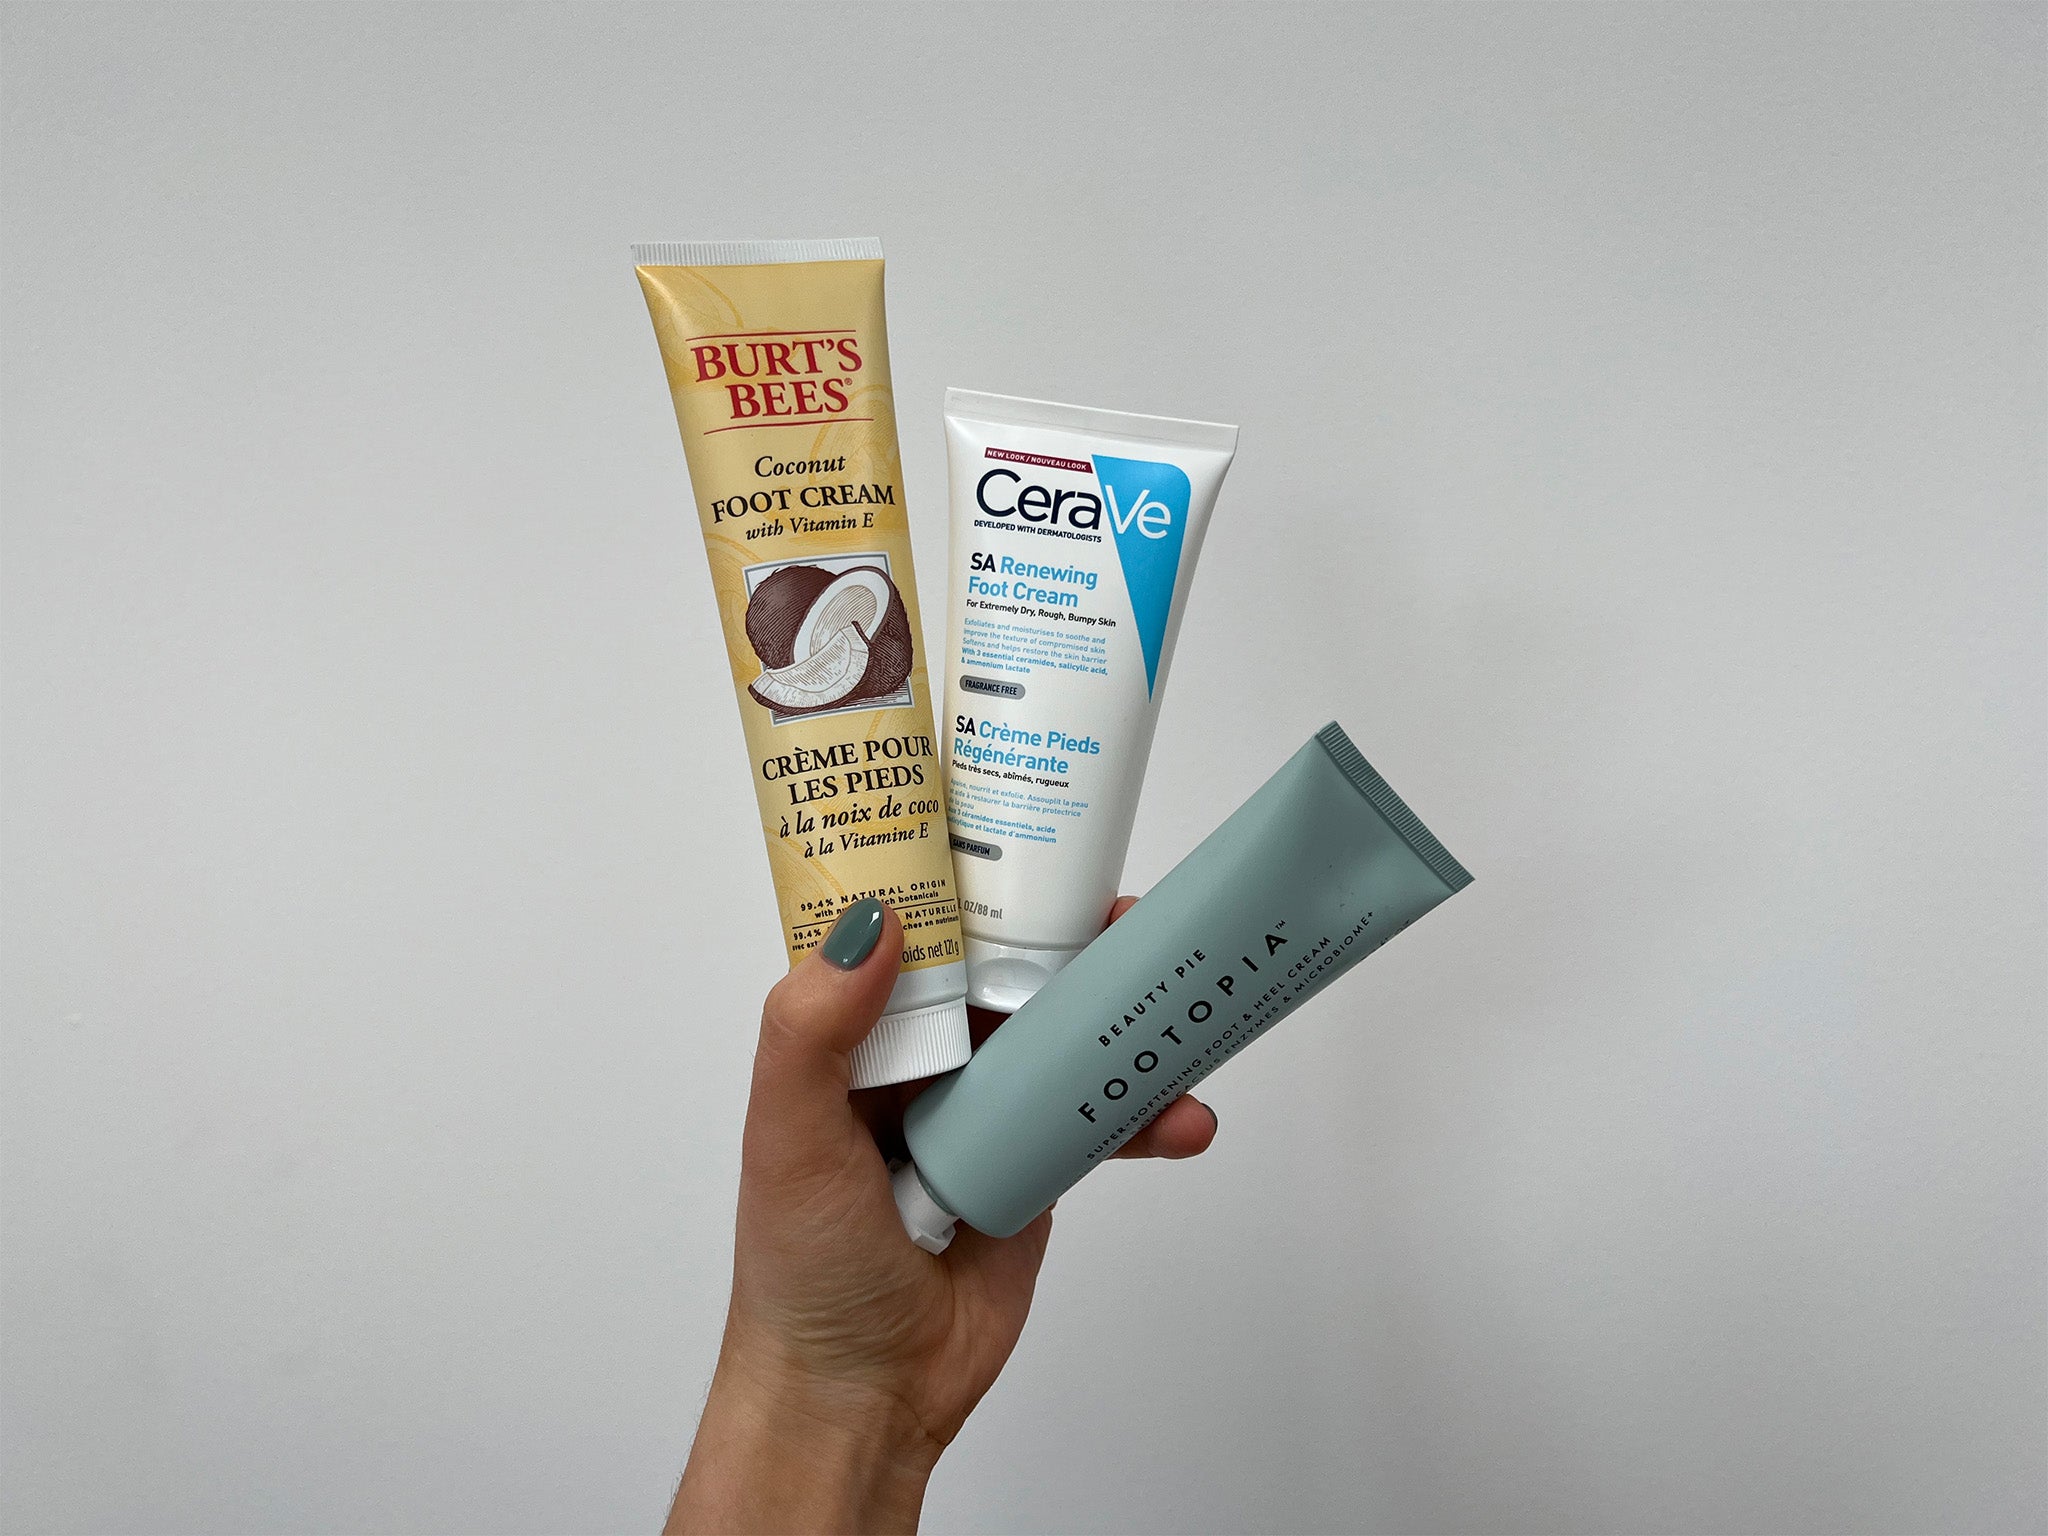 Just a few of the foot creams we tried, during our search for the best